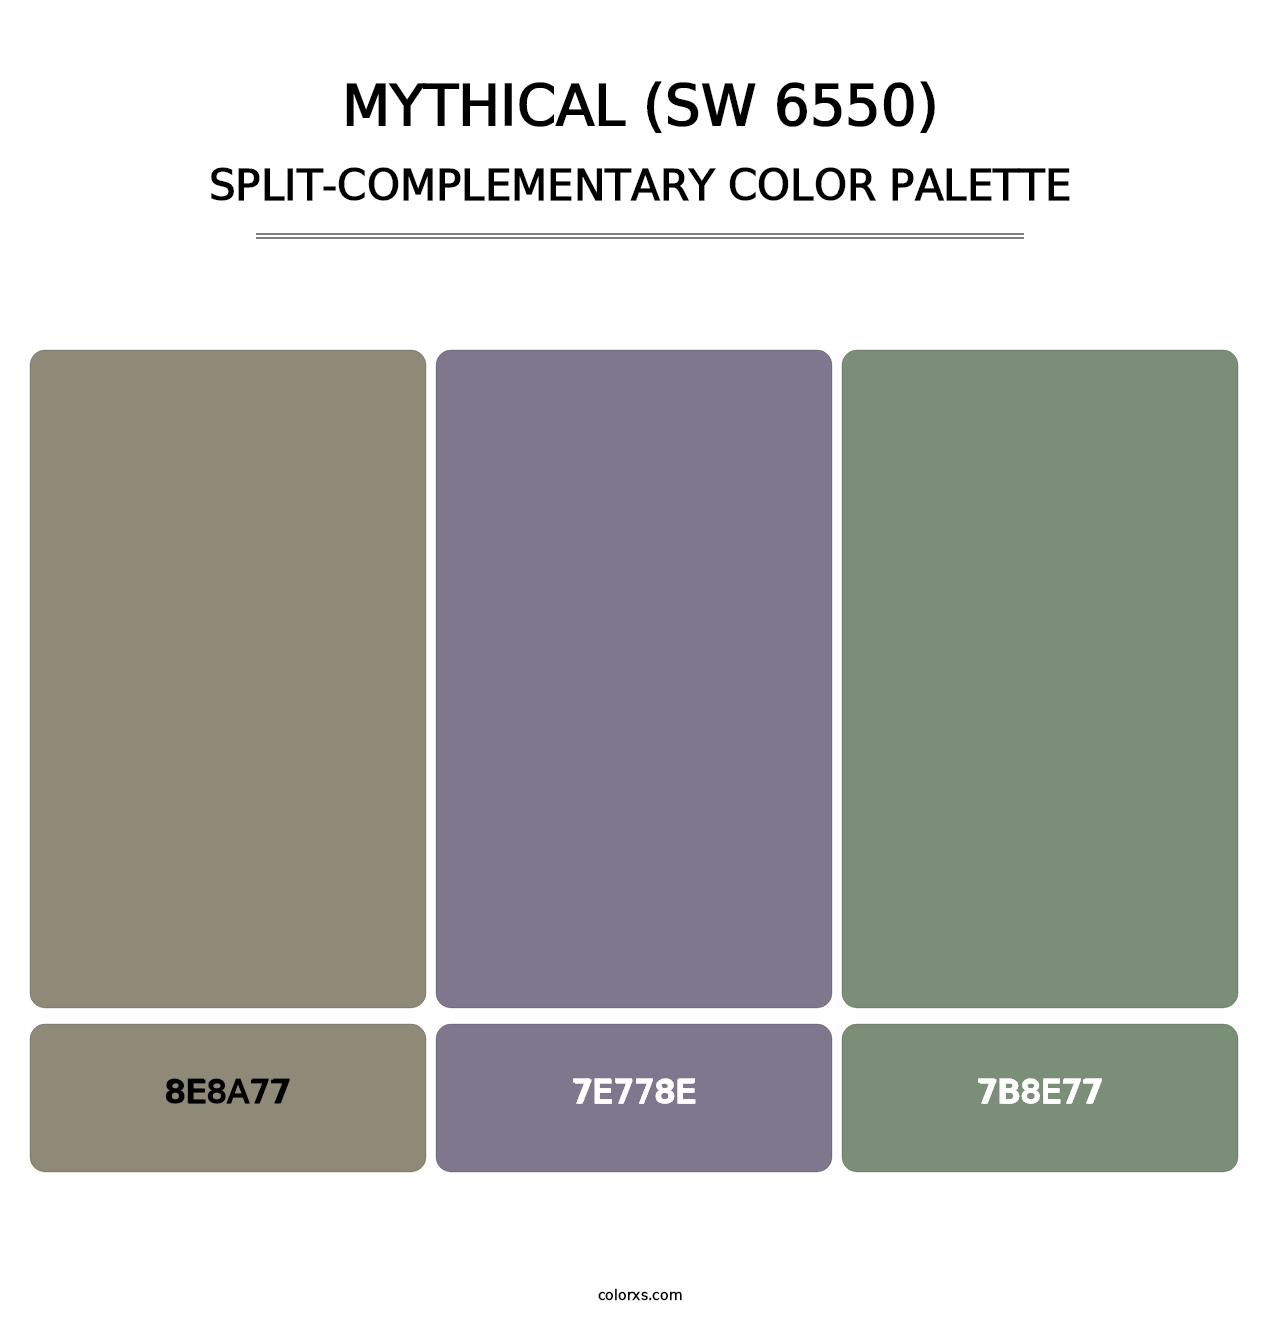 Mythical (SW 6550) - Split-Complementary Color Palette